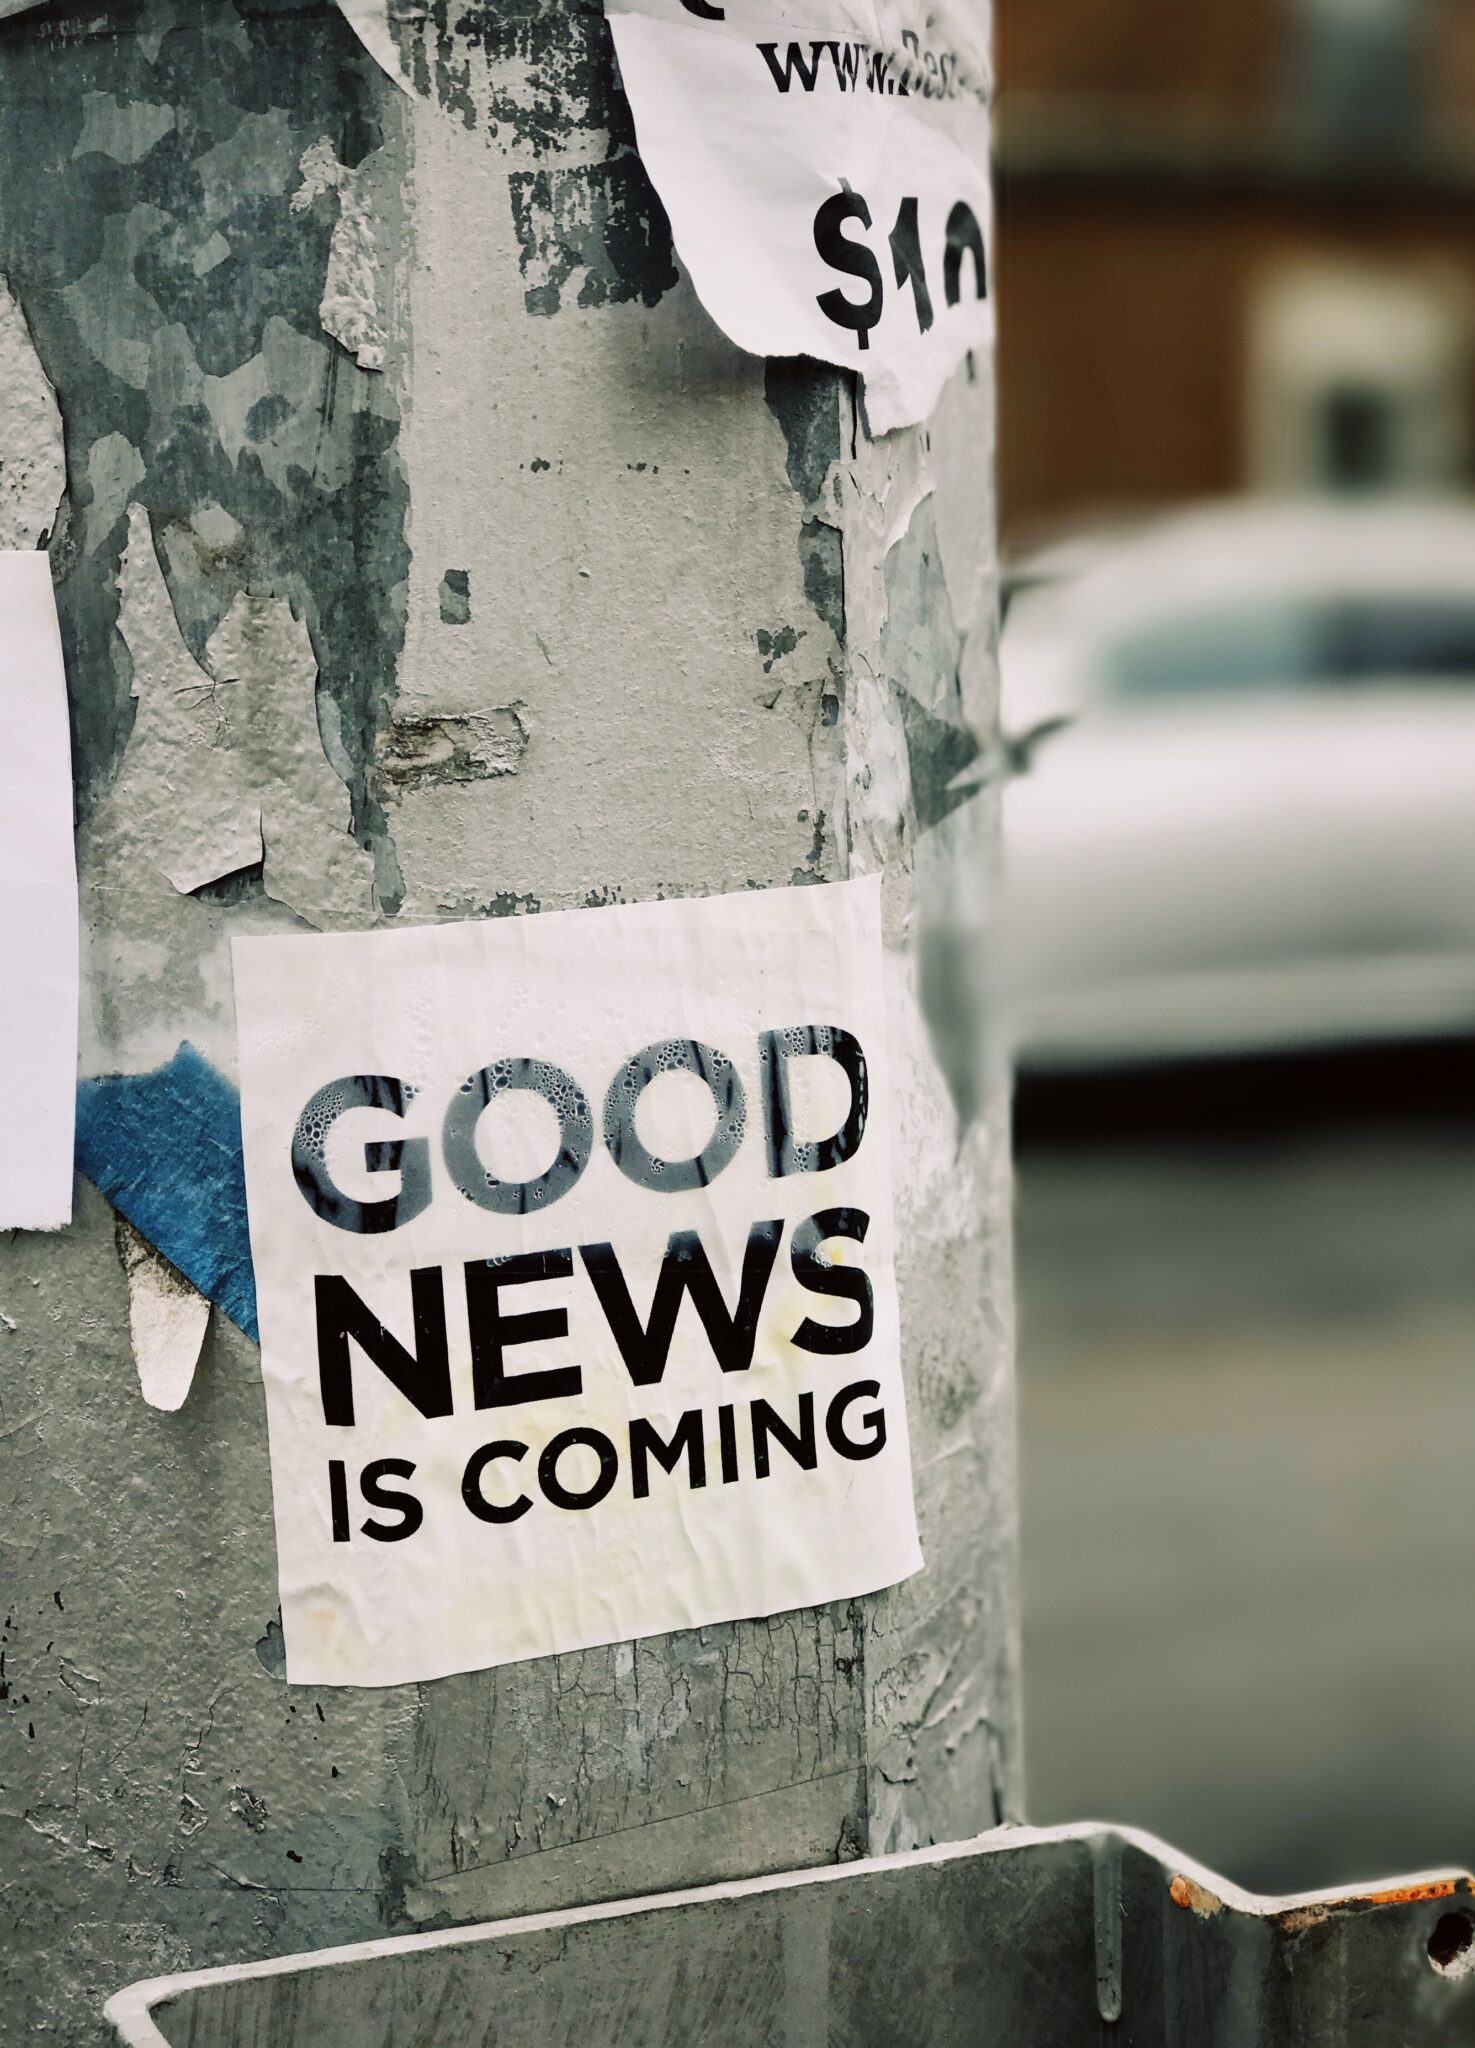 sticker "Good News is Coming"